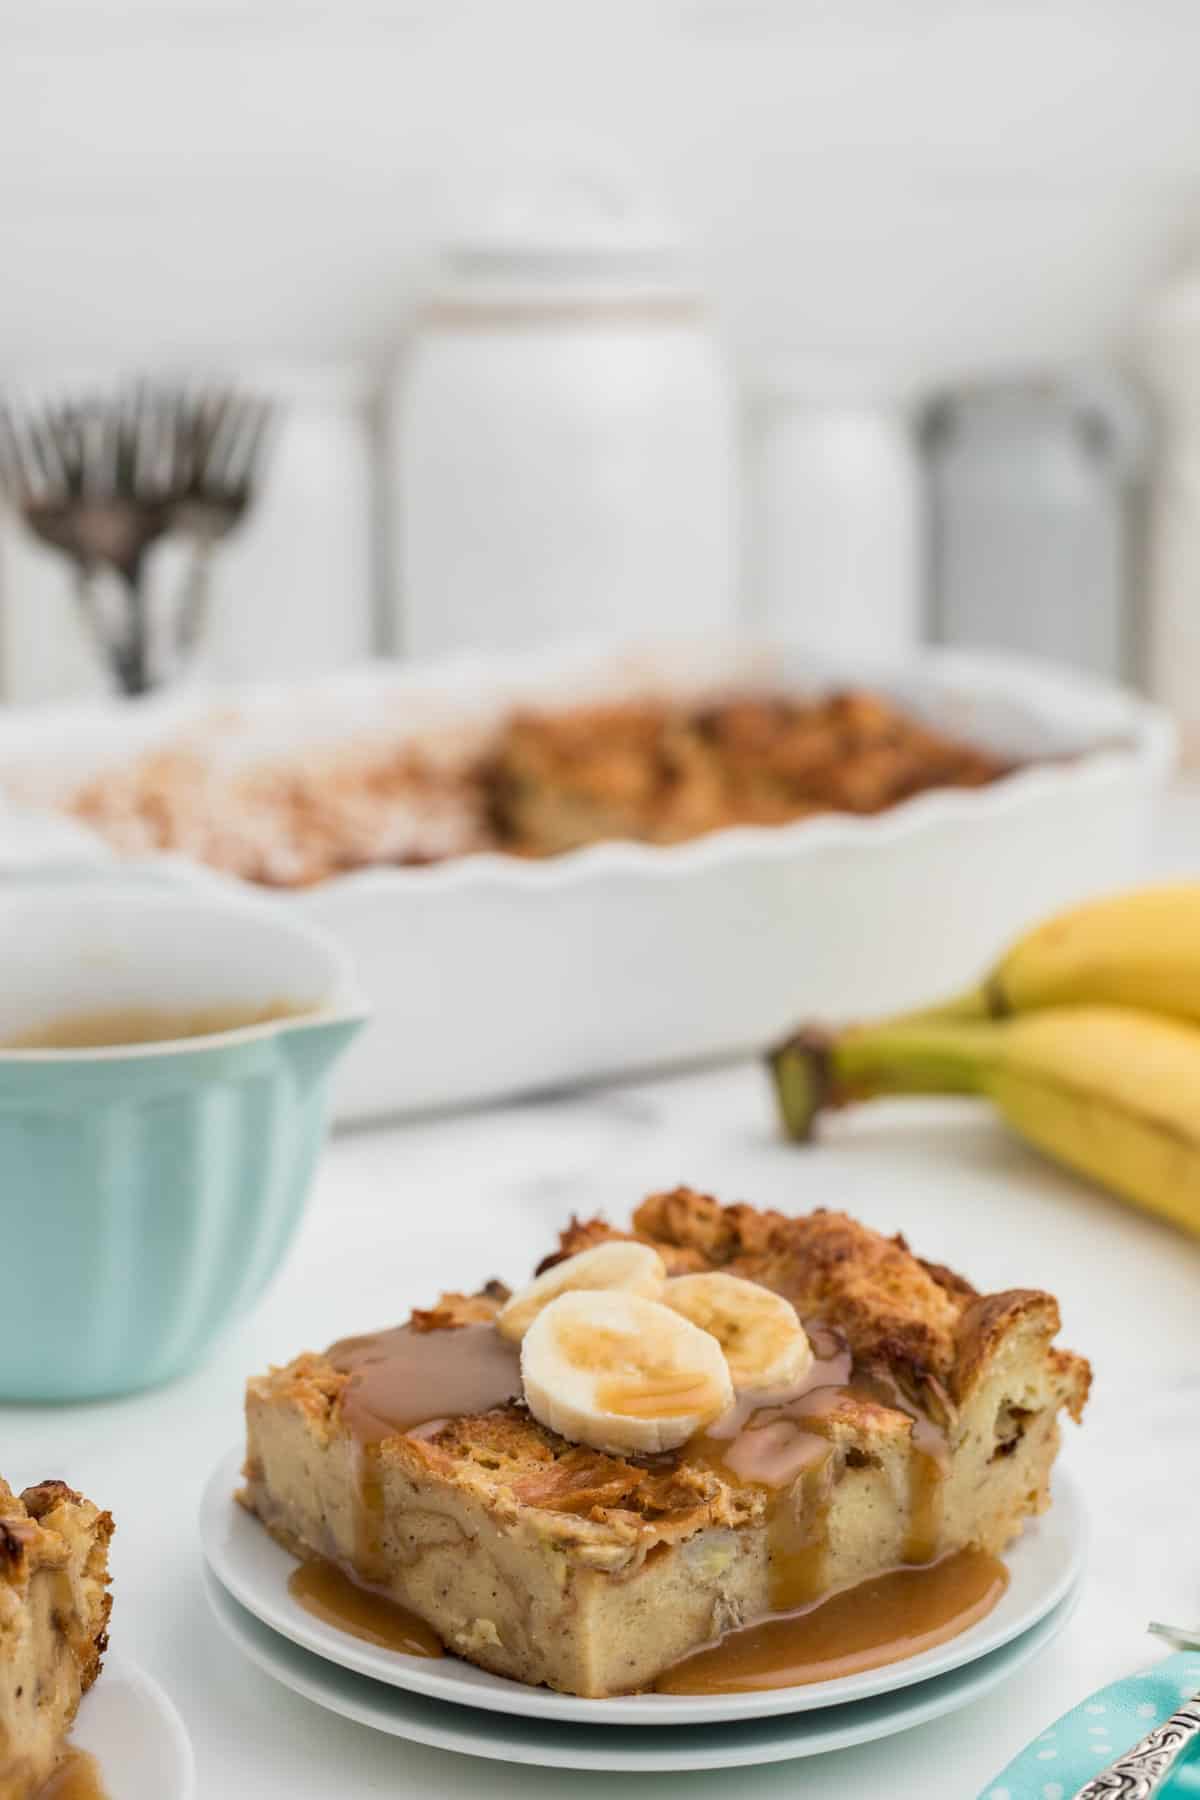 A plate with a slice of bread pudding is topped with caramel and banana slices.